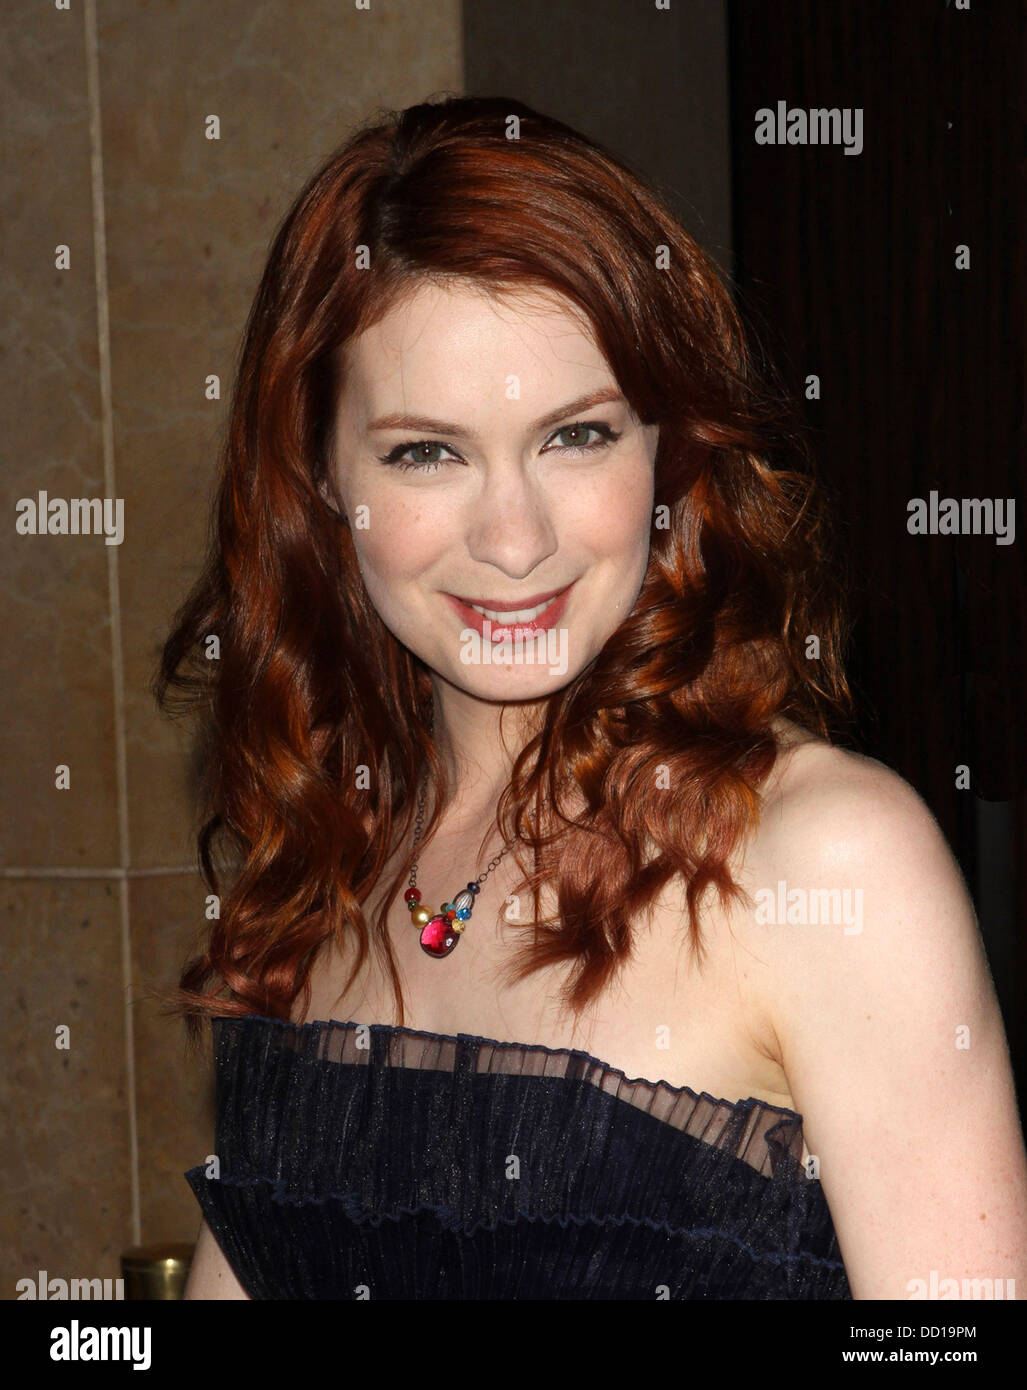 Felicia Day The 23rd Annual Producers Guild Awards held at The Beverly Hilton - Arrivals Los Angeles, California - 21.01.12 Stock Photo